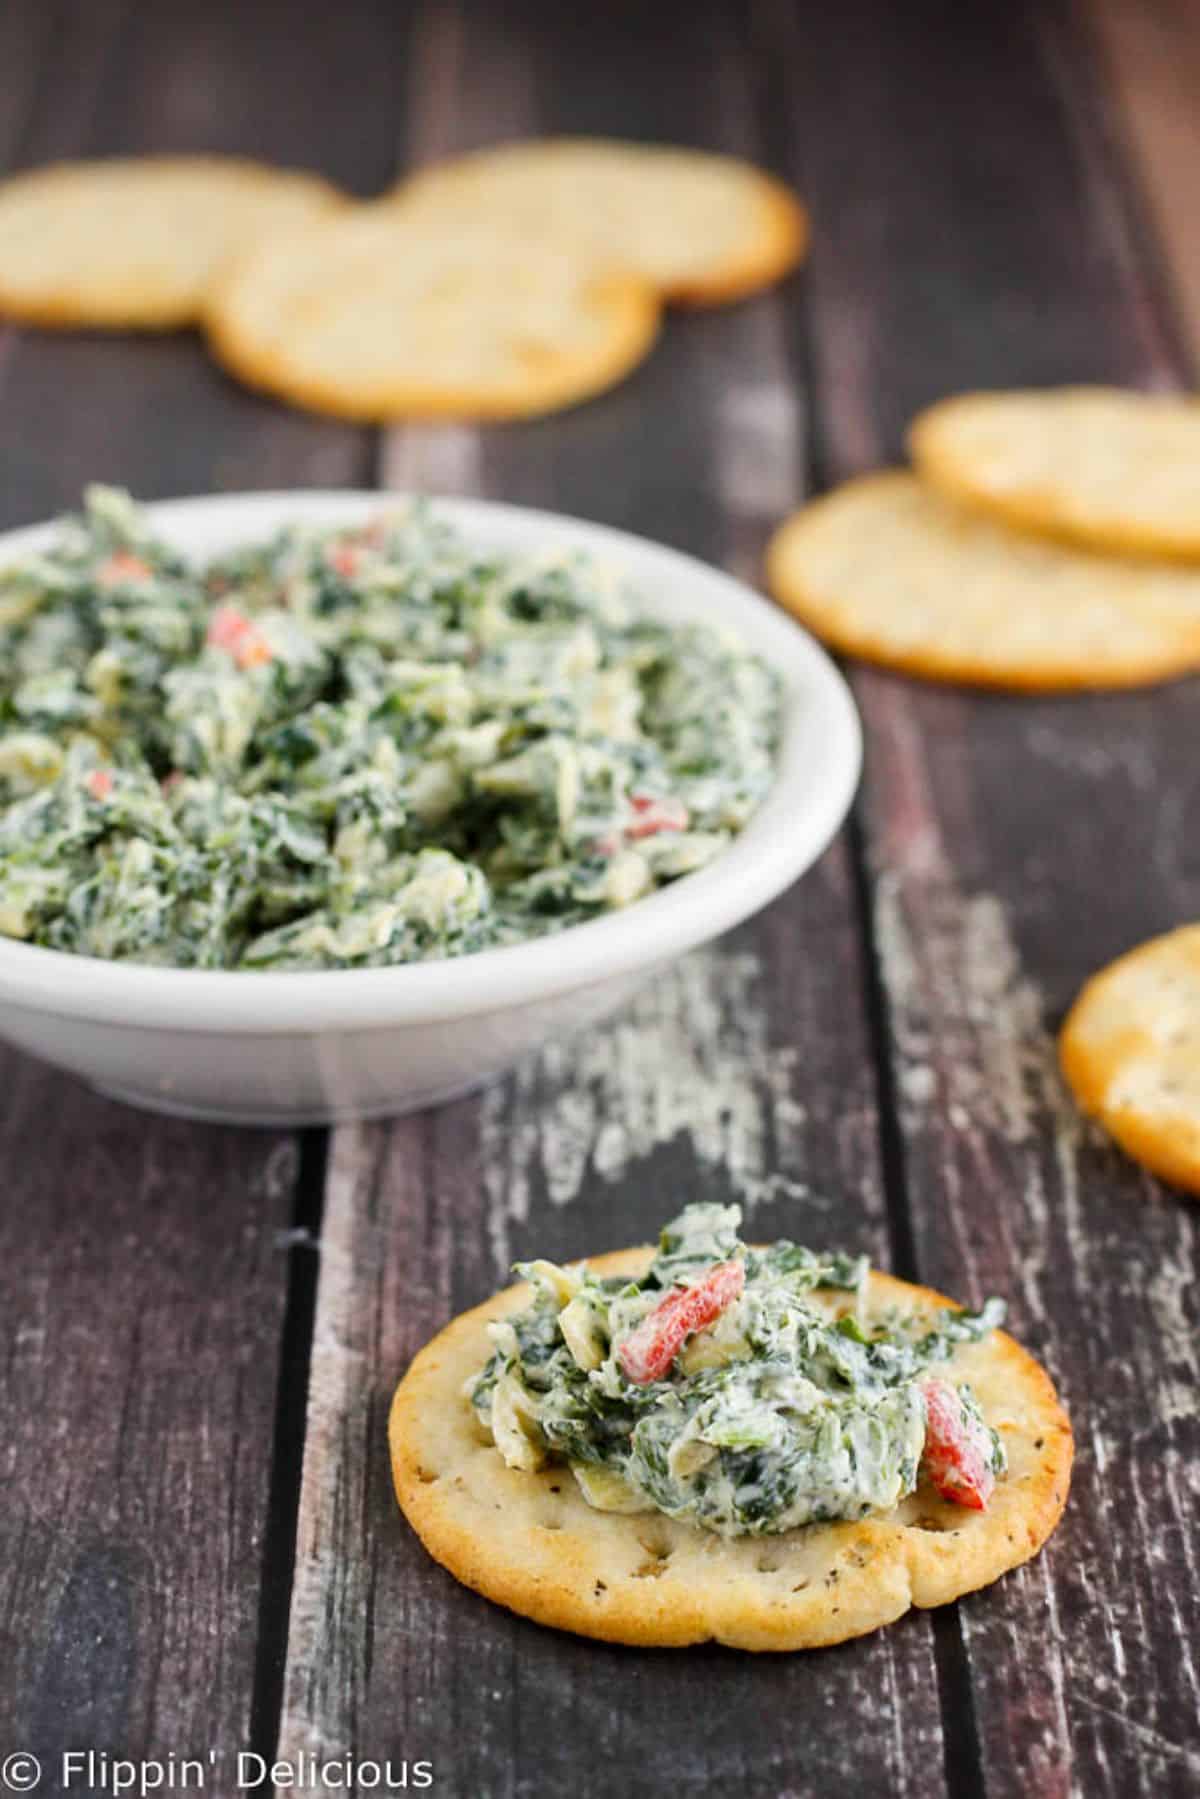 Delicious Gluten-Free Skinny Spinach Artichoke Dip in a white bowl and on cracker.